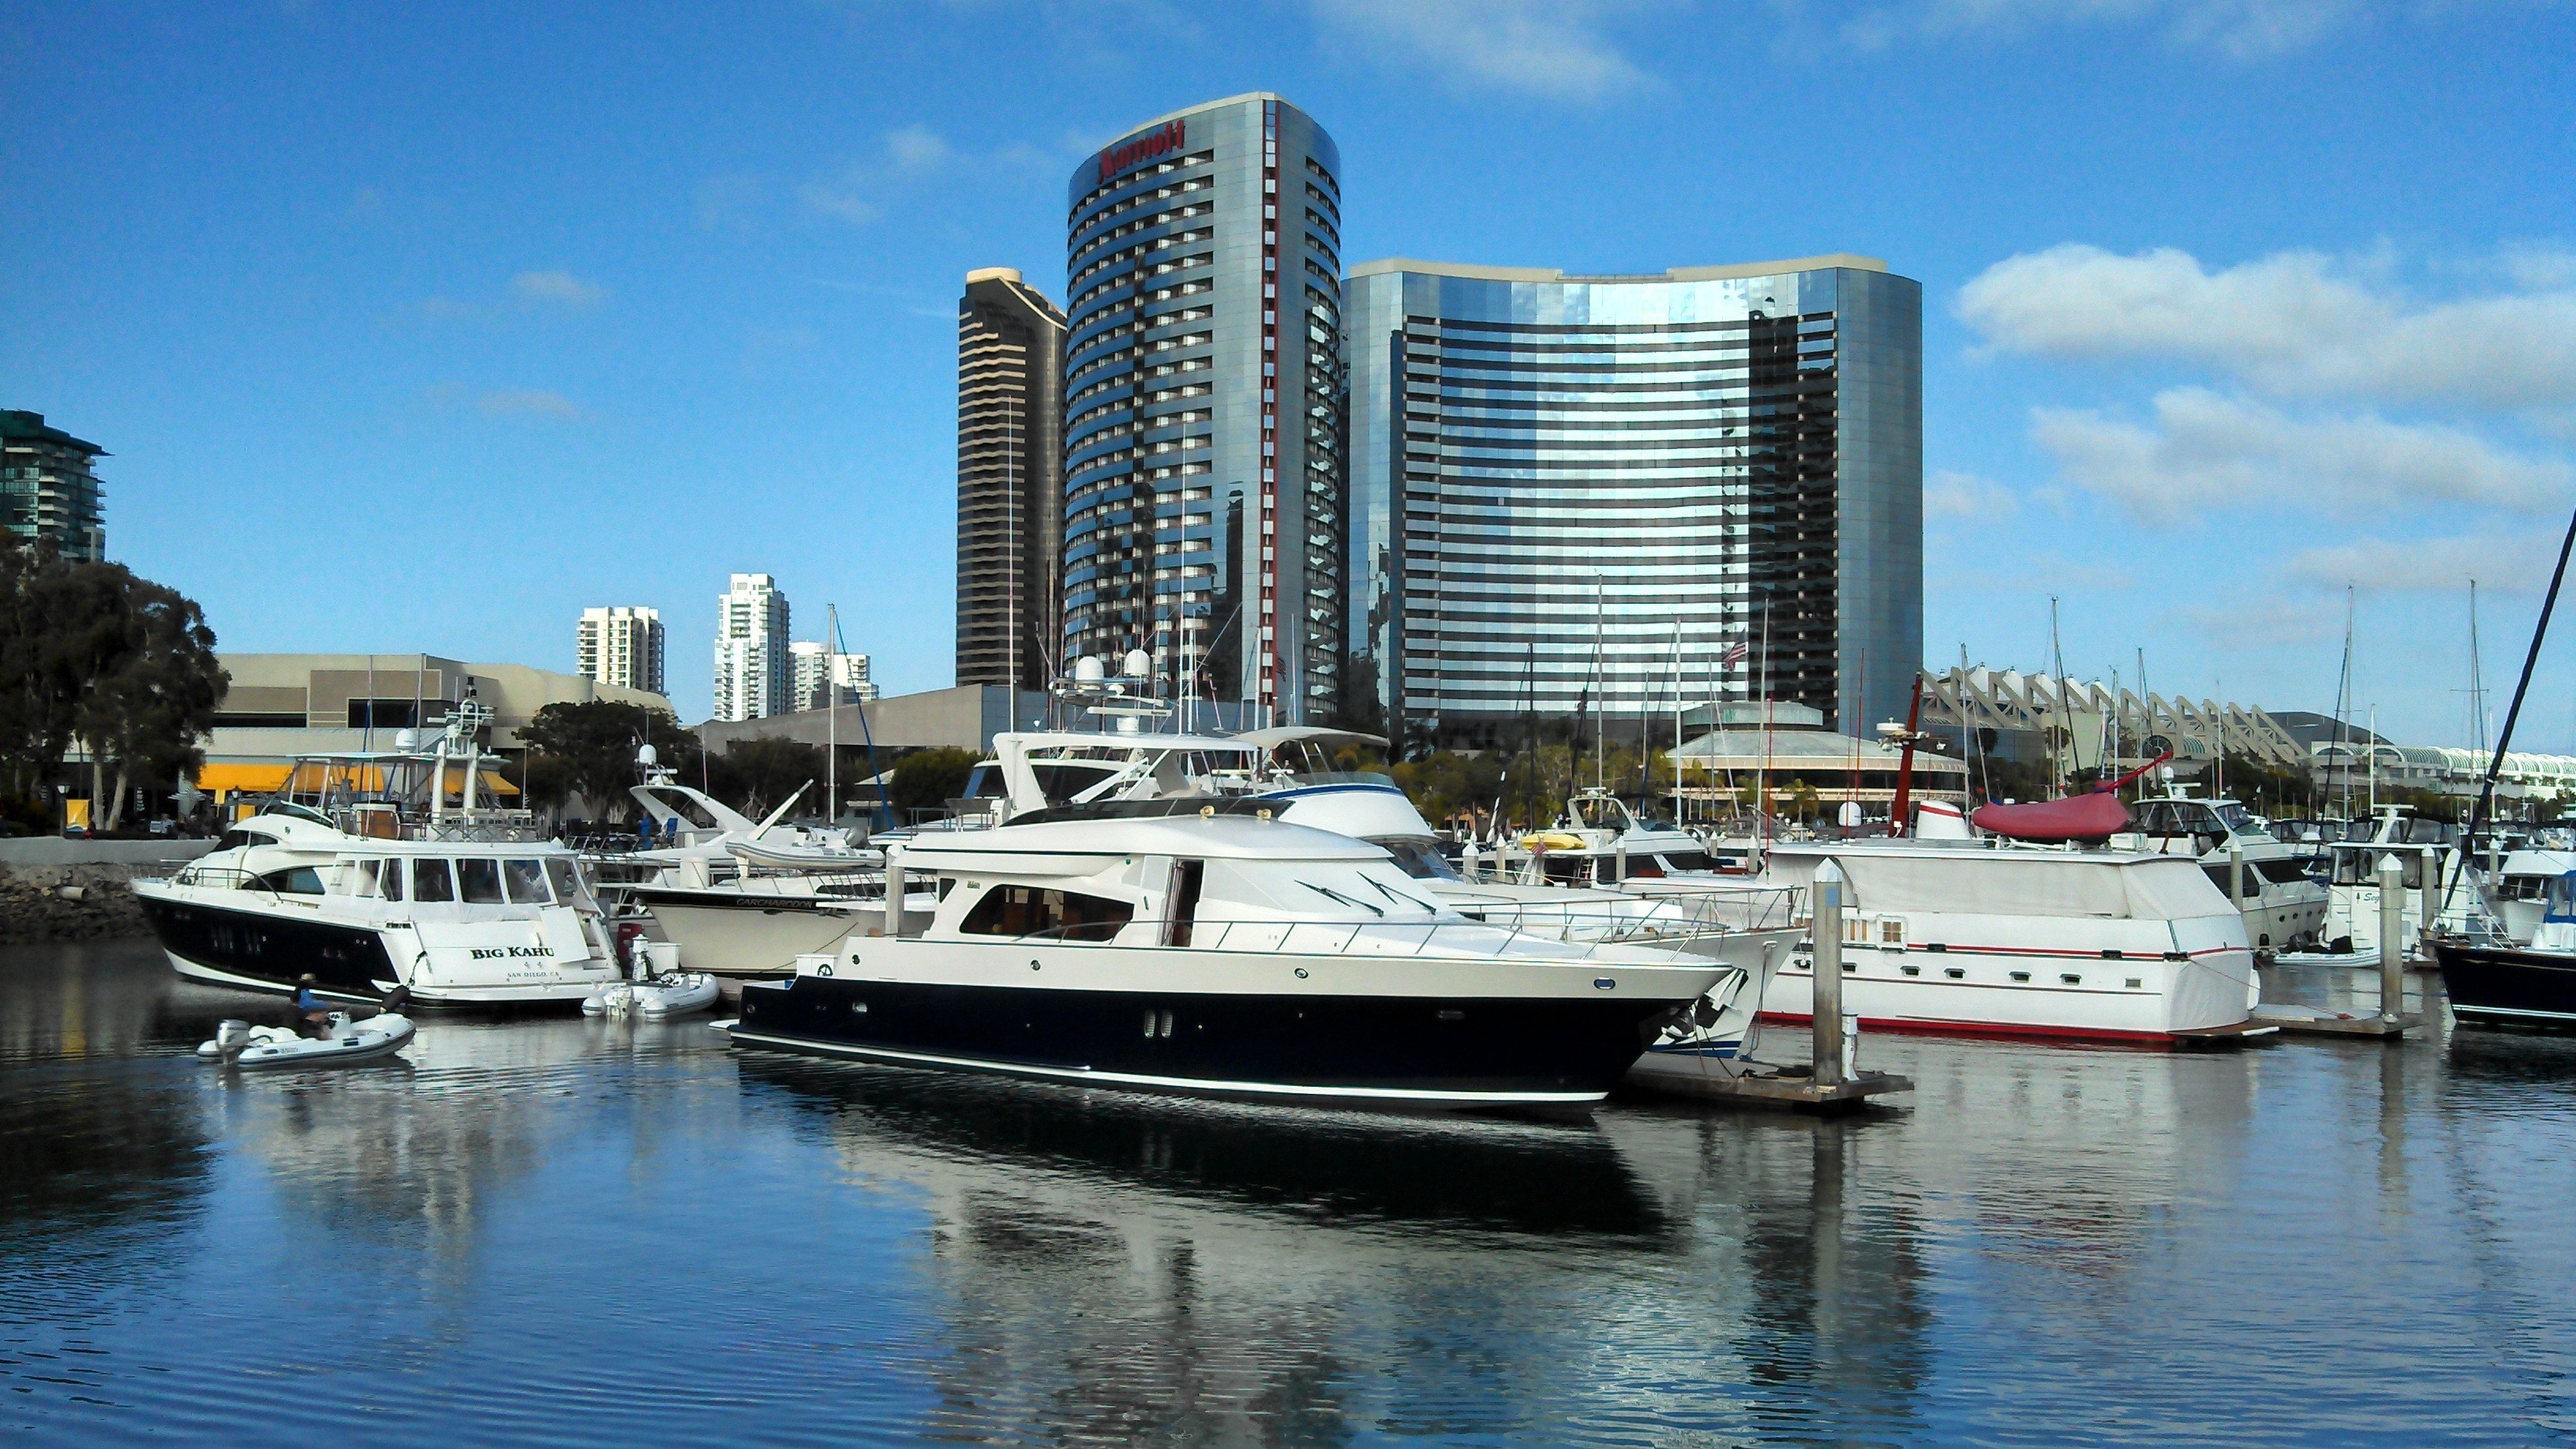 white and black boats on the boat ports with high rise building